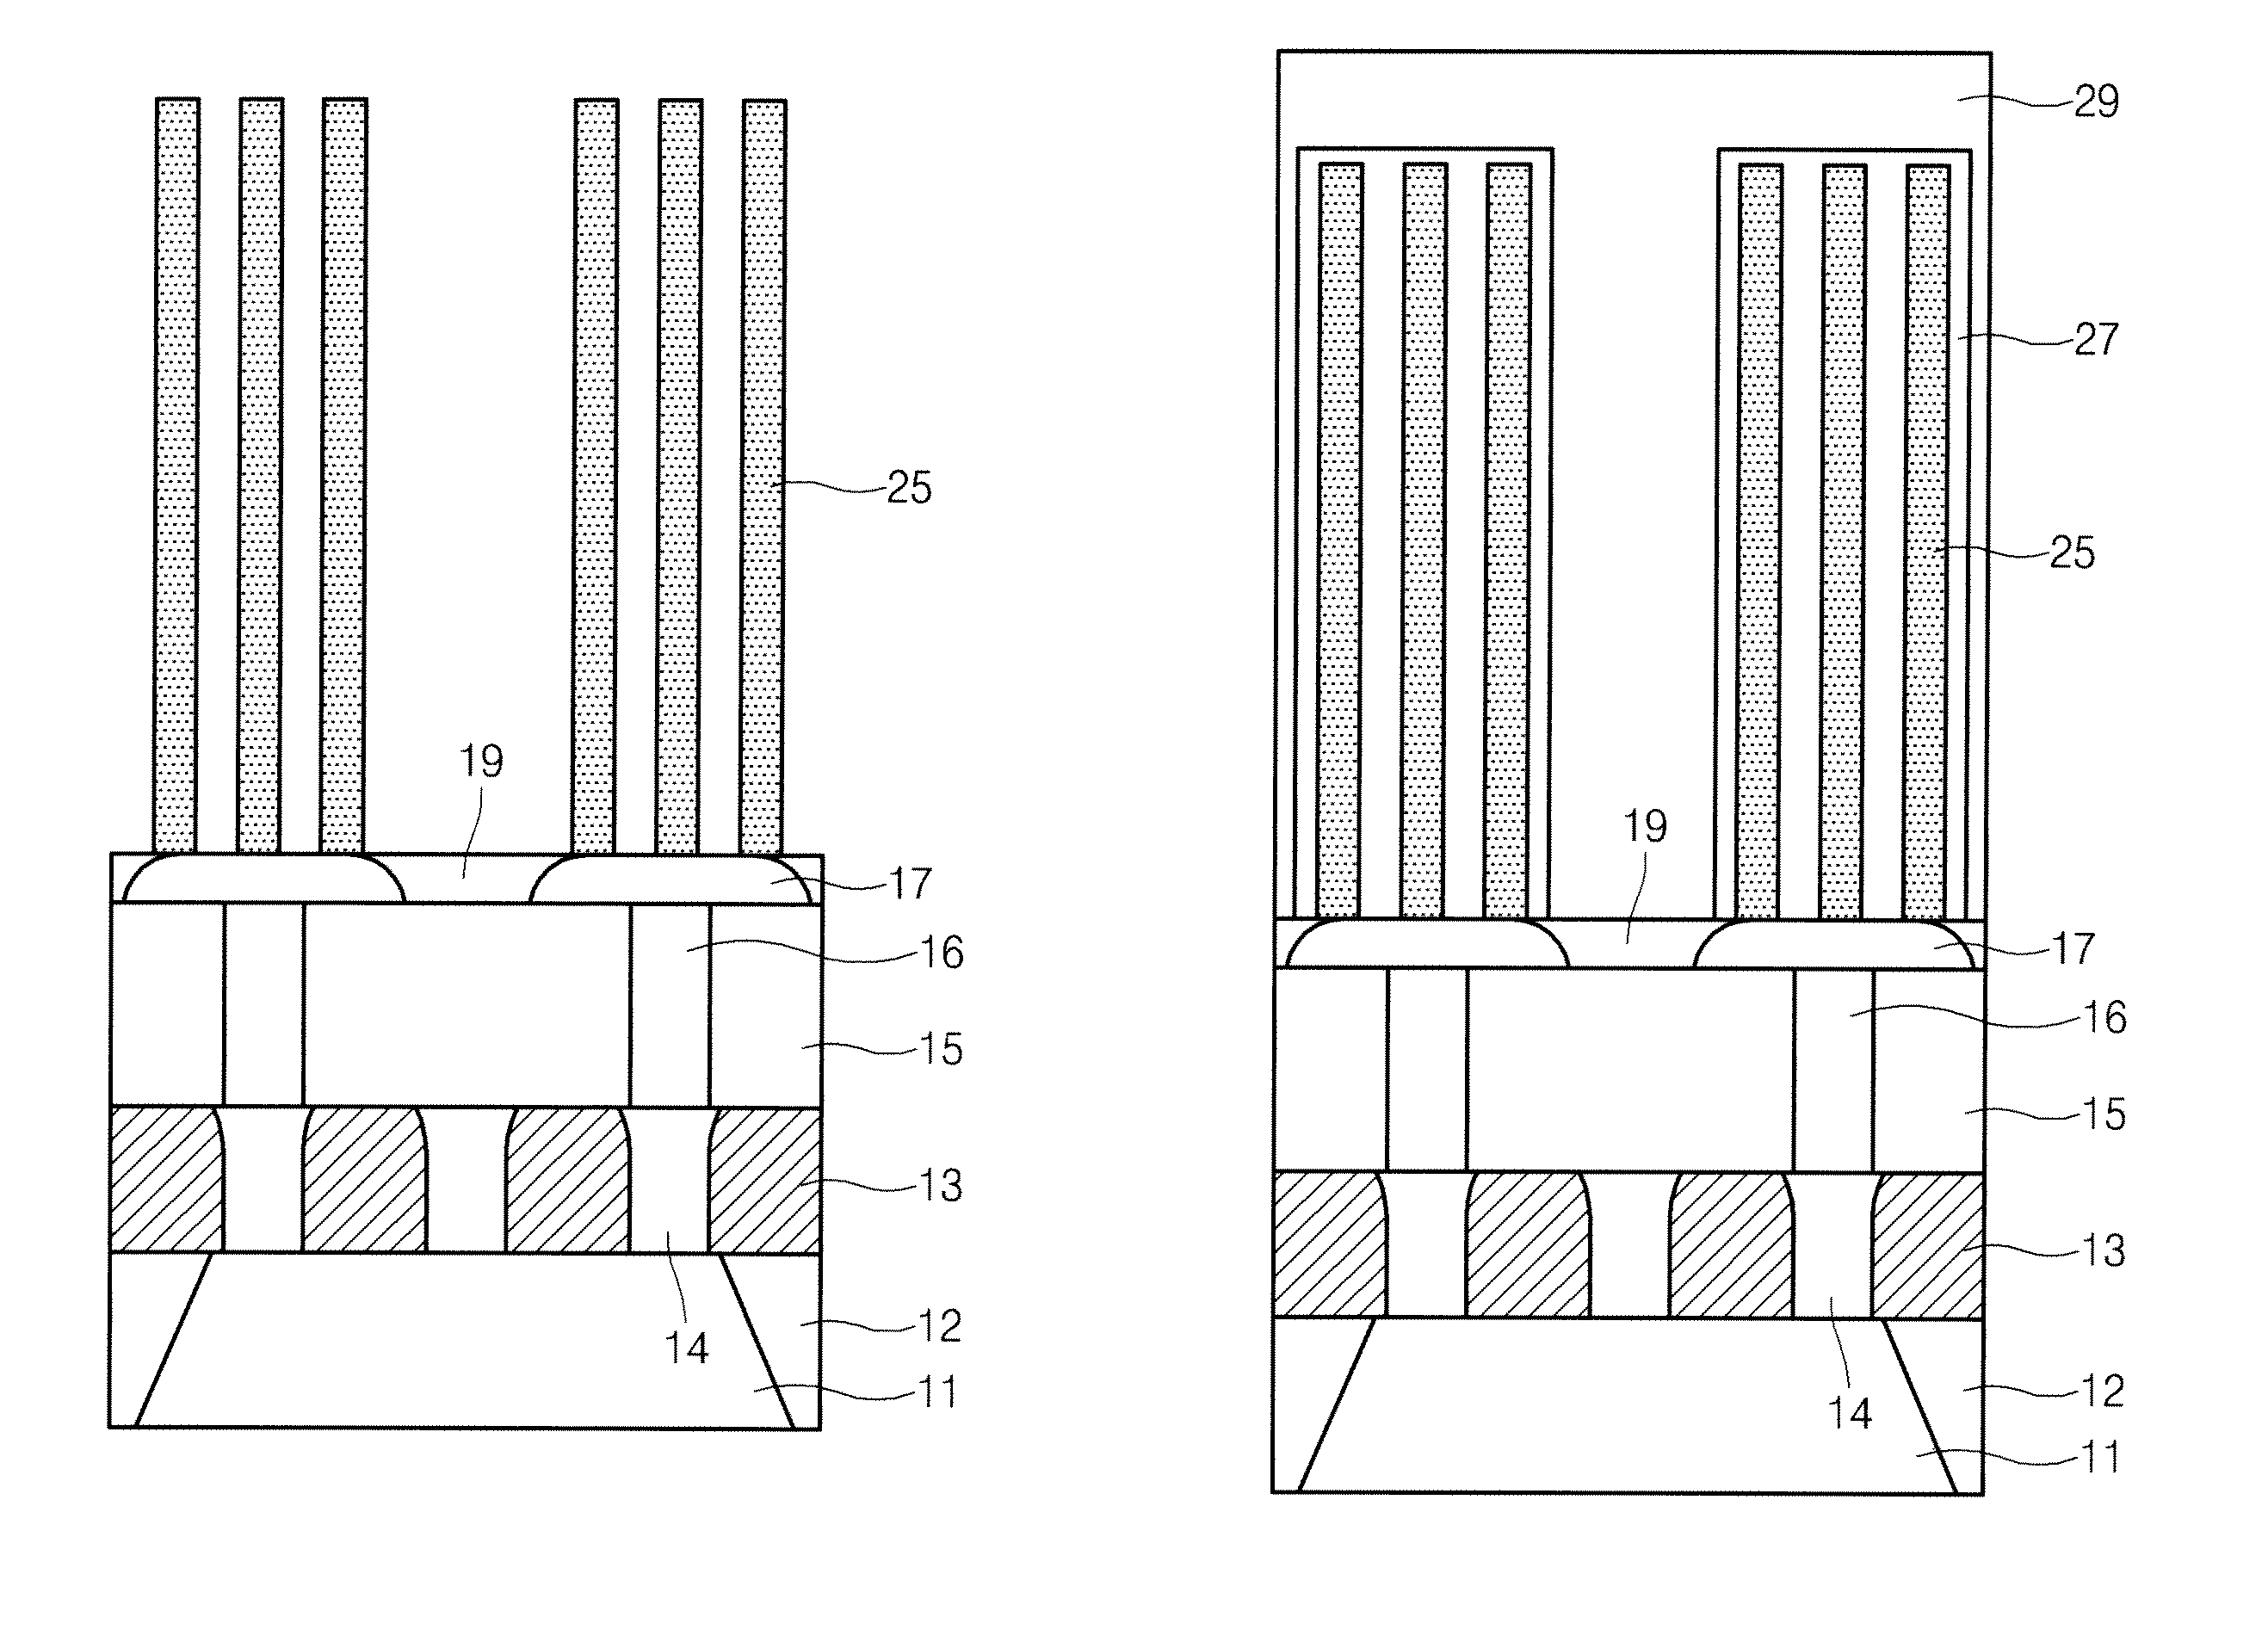 Method for fabricating capacitor of semiconductor device